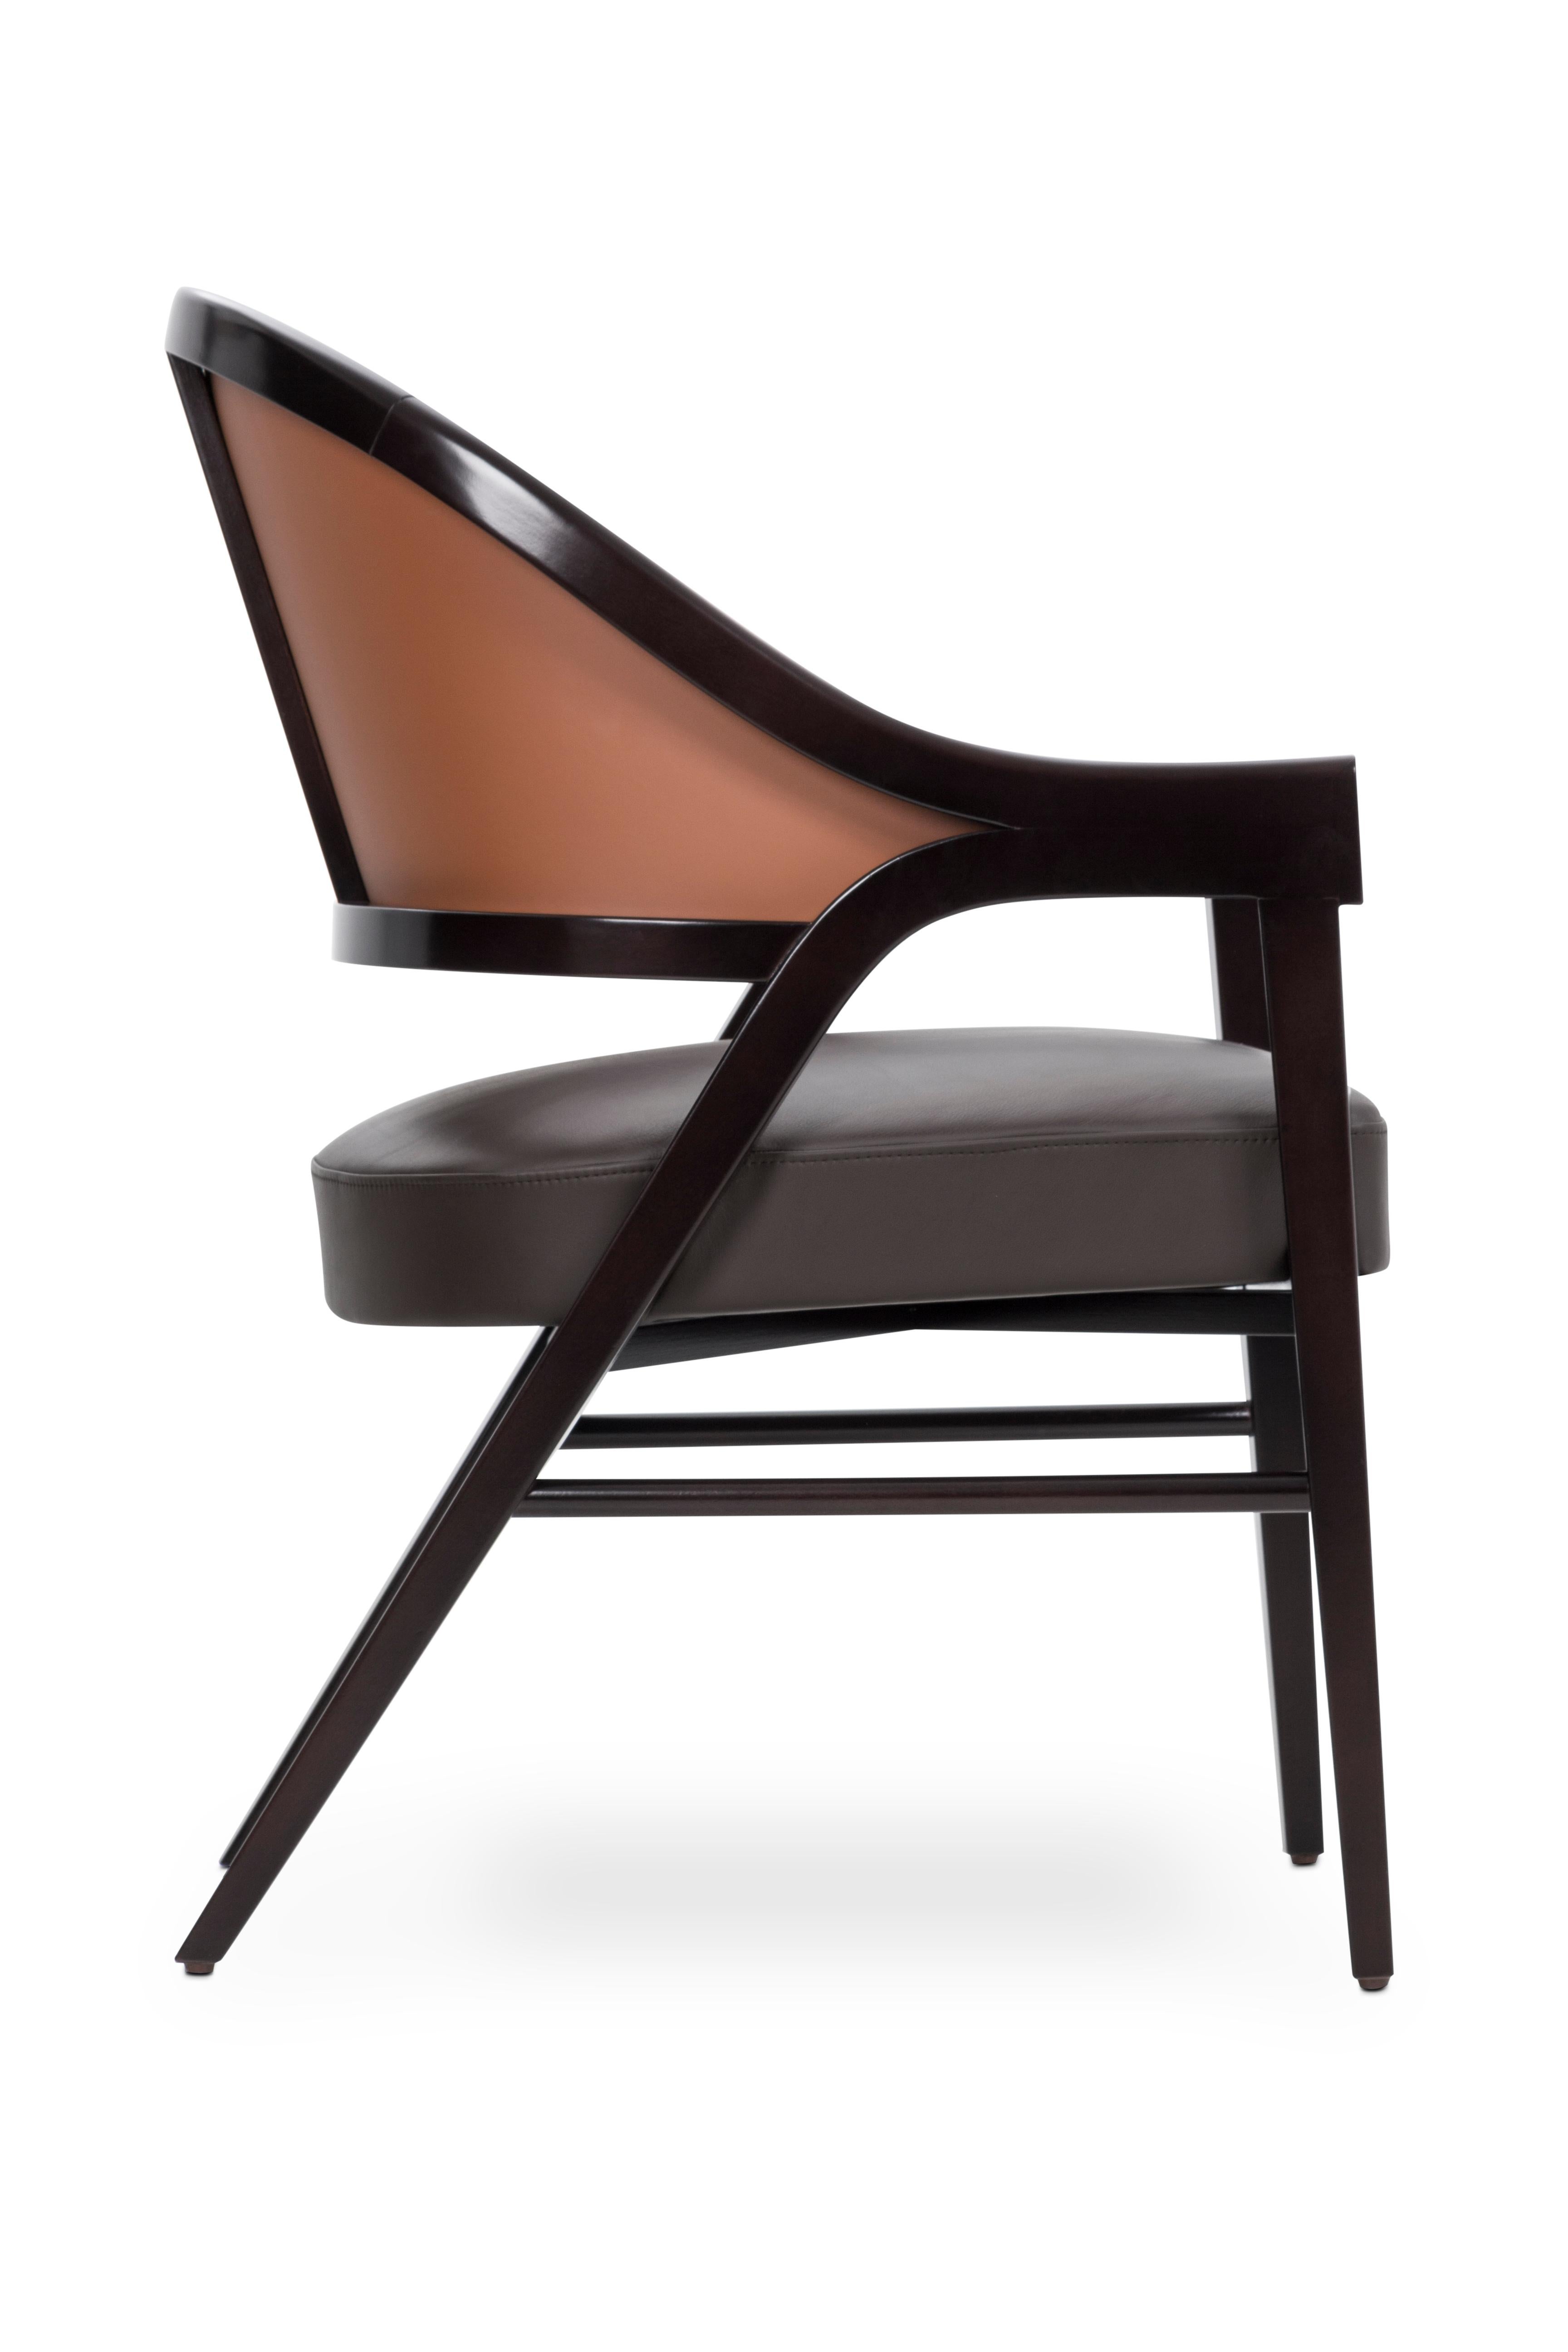 The  GRACE chair – a timeless masterpiece that seamlessly blends elegance and comfort. Inspired by the graceful curves of the female silhouette, this chair is a work of art that transcends trends. Crafted with a solid ash or beech structure, its